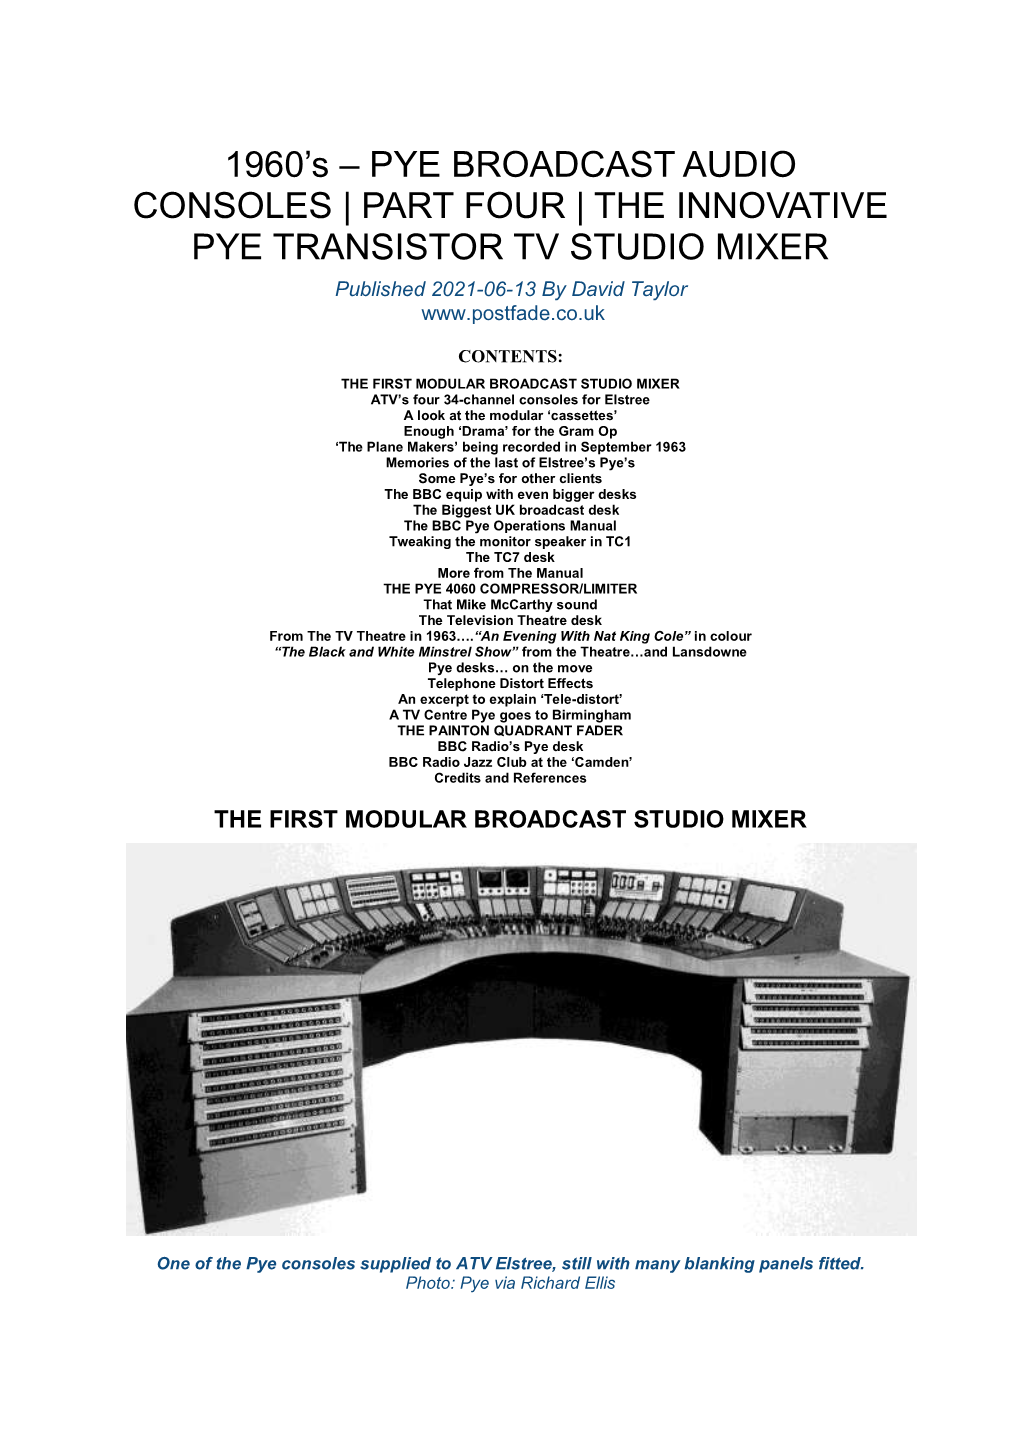 PYE BROADCAST AUDIO CONSOLES | PART FOUR | the INNOVATIVE PYE TRANSISTOR TV STUDIO MIXER Published 2021-06-13 by David Taylor